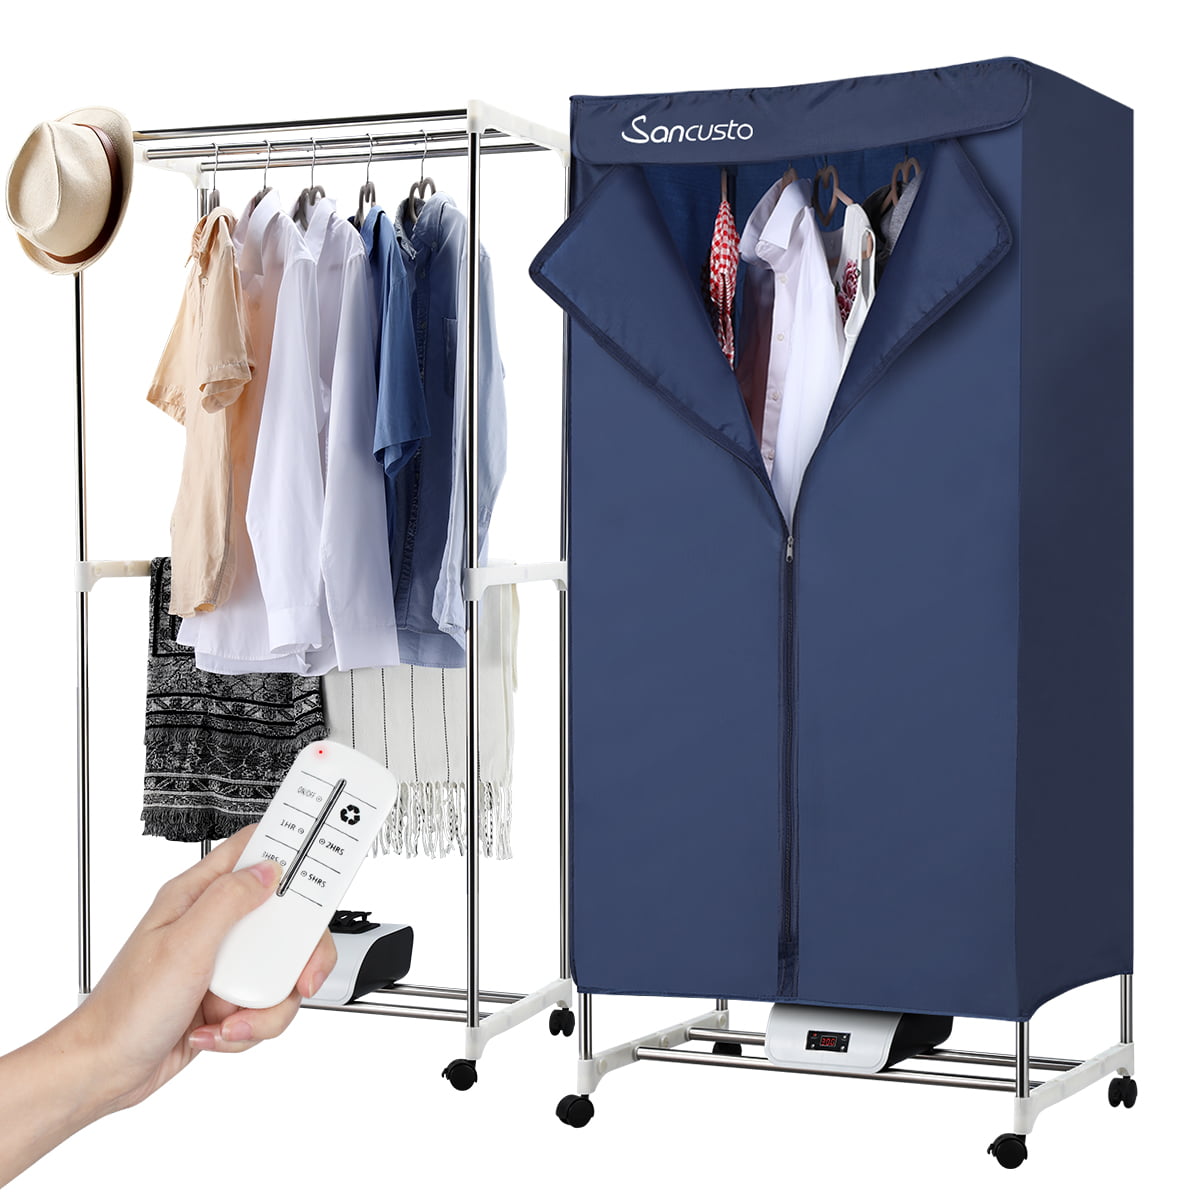 Details about   Portable Air Heater Clothes Dryer Rack Folding Drying Machine  Washers & Dryers 